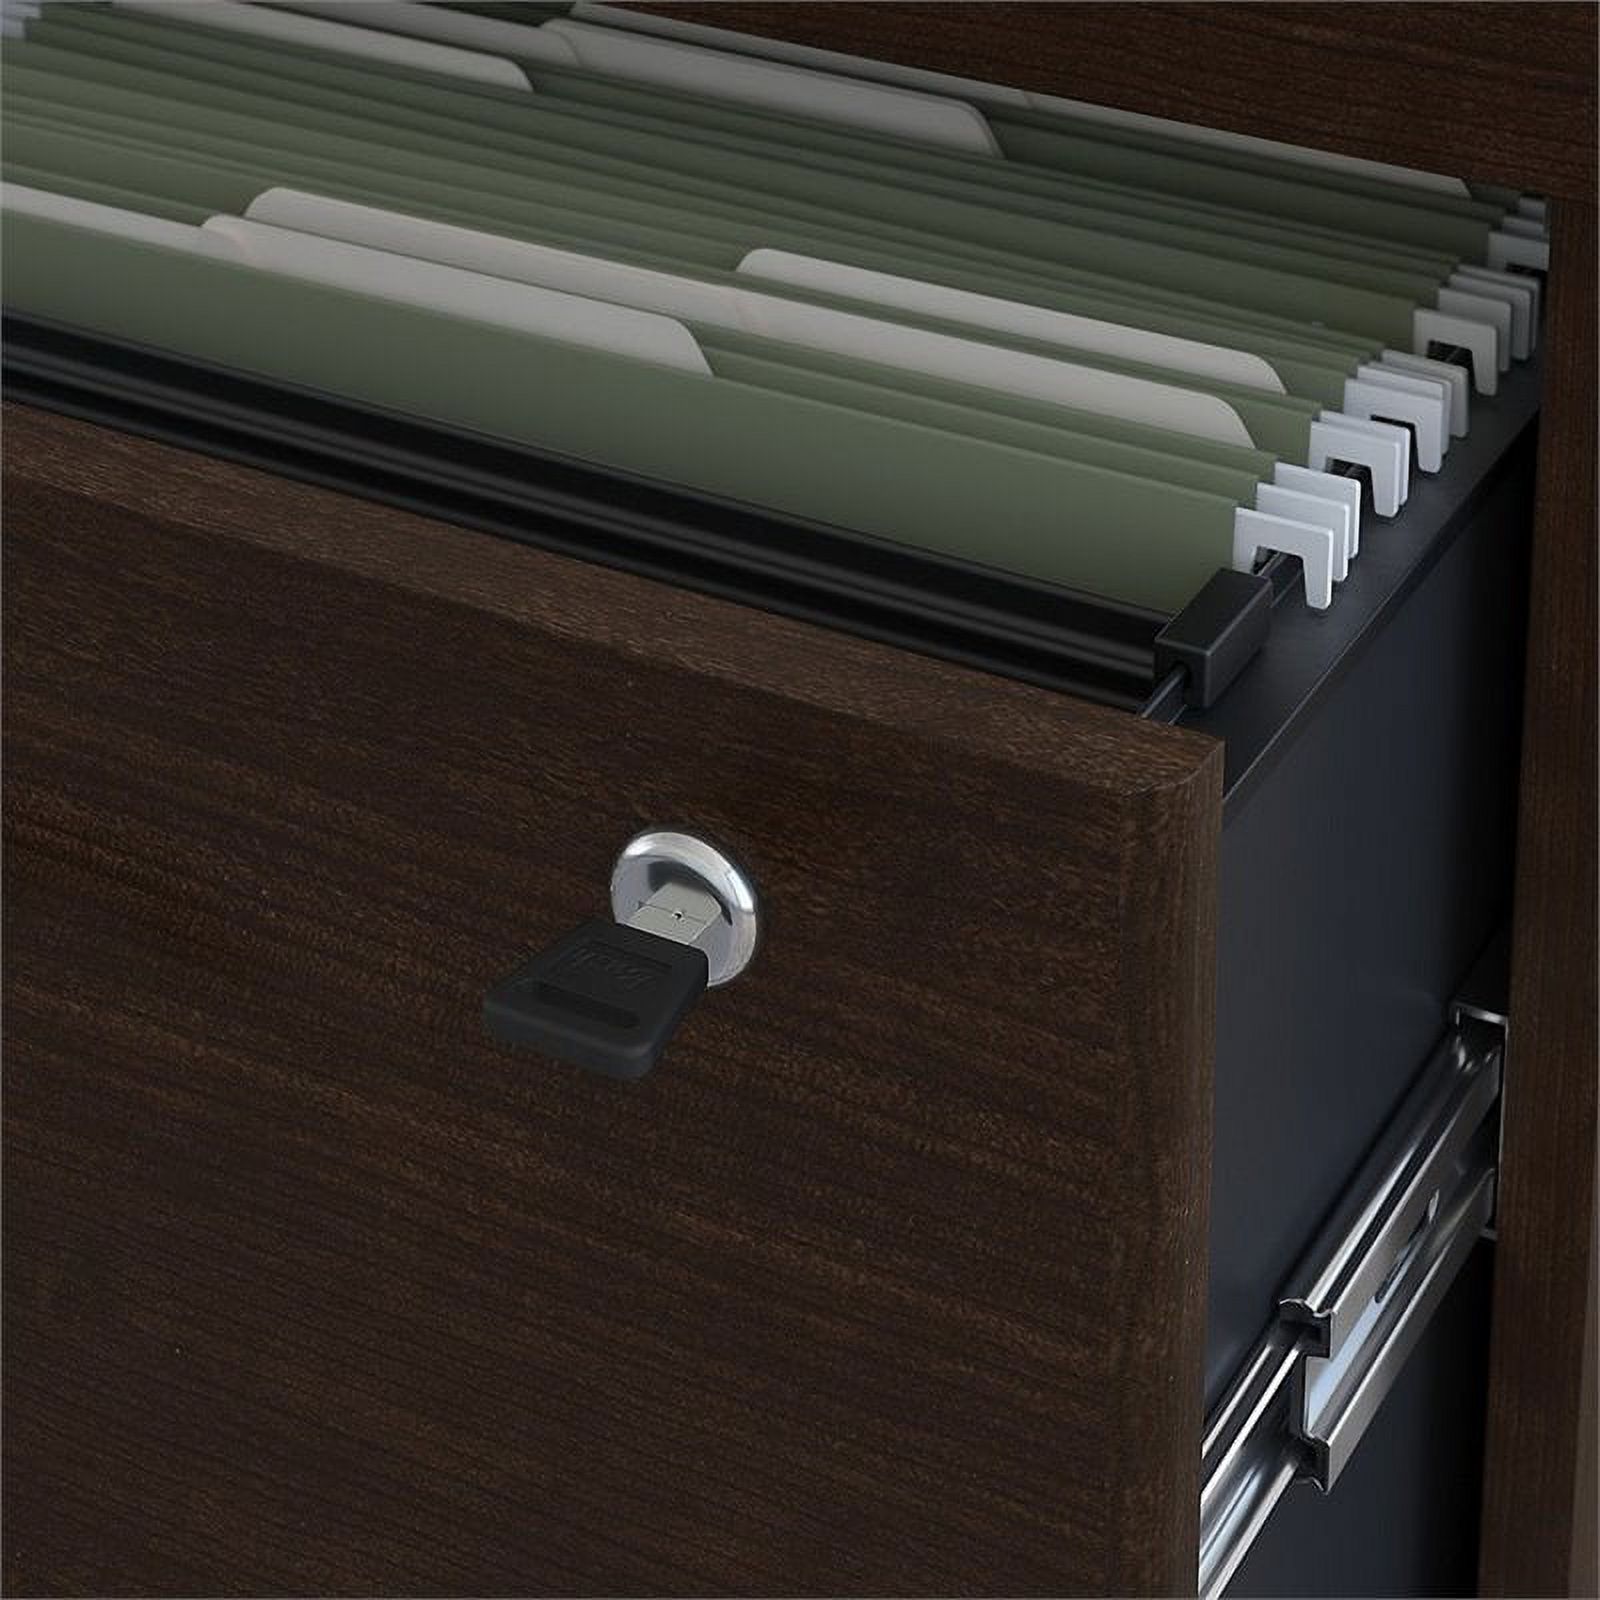 Home Square 2 Piece Wood Filing Cabinet Set with 2 Drawer in Mocha Cherry - image 4 of 9